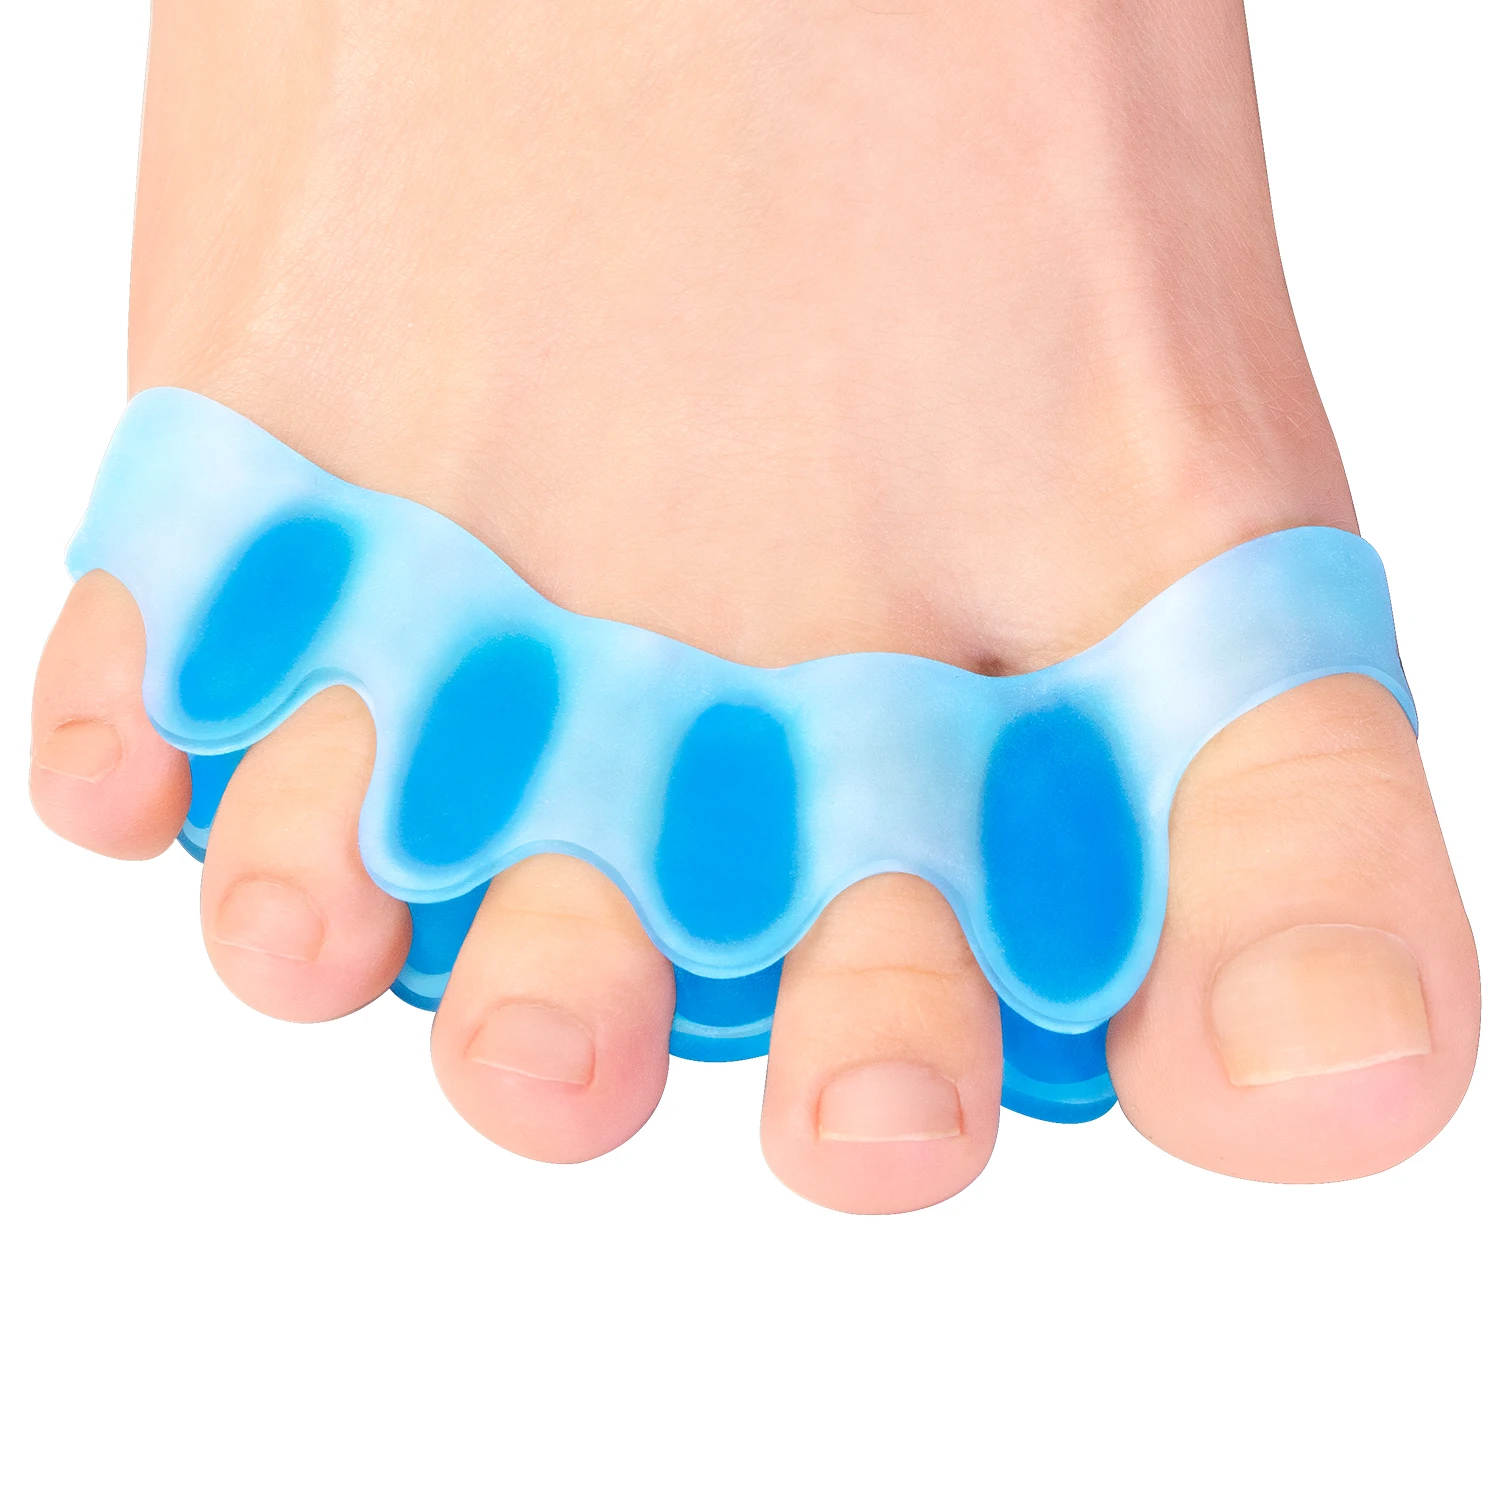 2pcs Soft Transparent Blue Toe Separators Hallux Valgus Bunion Corrector Separate Overlapping Toes Pain Relief Foot Care C1757 winter forest deep blue shower curtain transparent bathroom shower for bathrooms bathroom shower set bath curtain